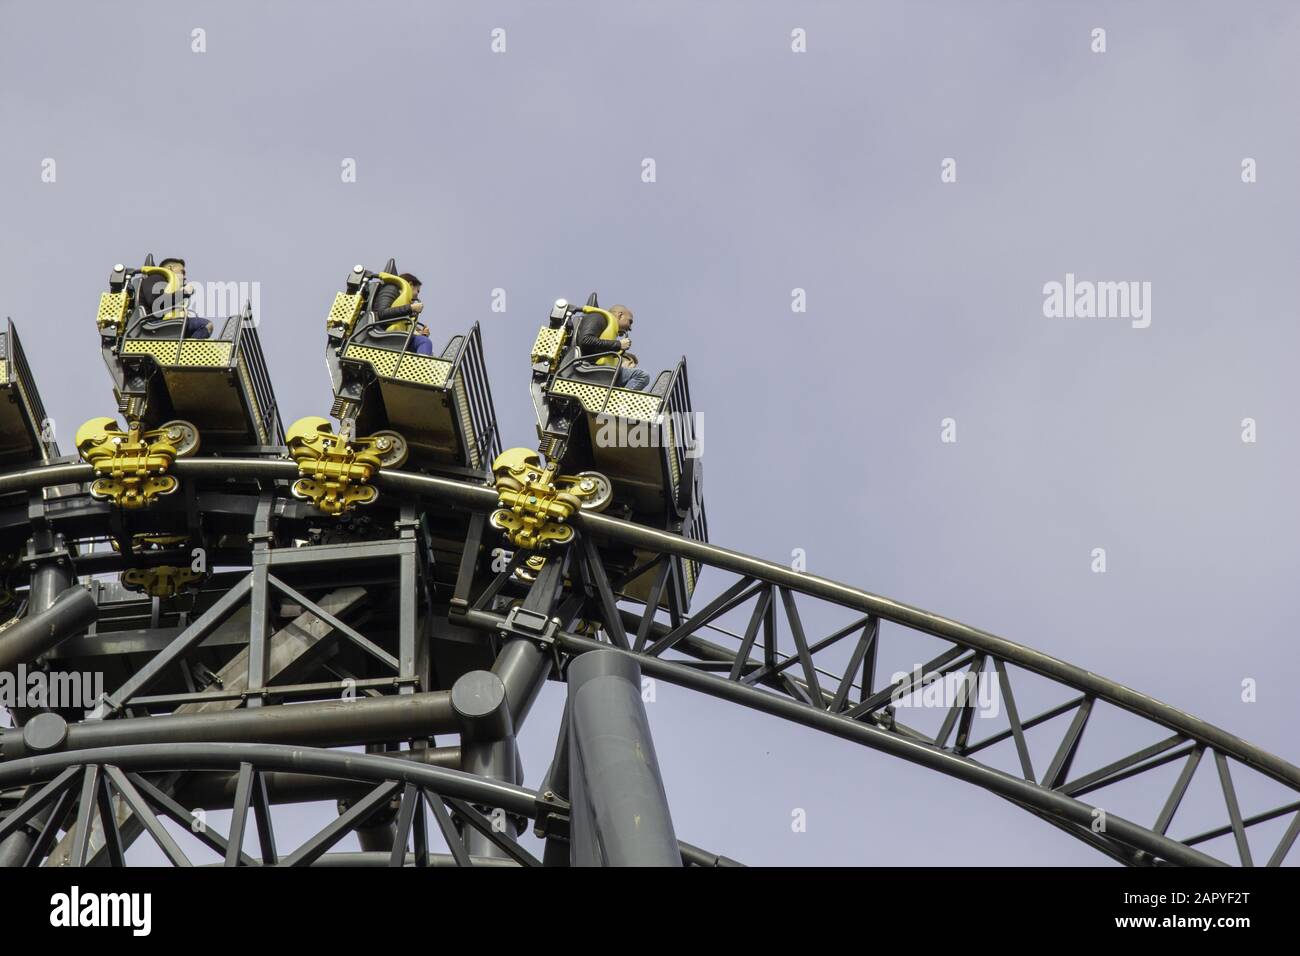 ALTON, UNITED KINGDOM - Apr 07, 2019: Alton Towers Resort, UK. The Smiler rollercoaster at Alton Towers Theme Park in Staffordshire. Stock Photo